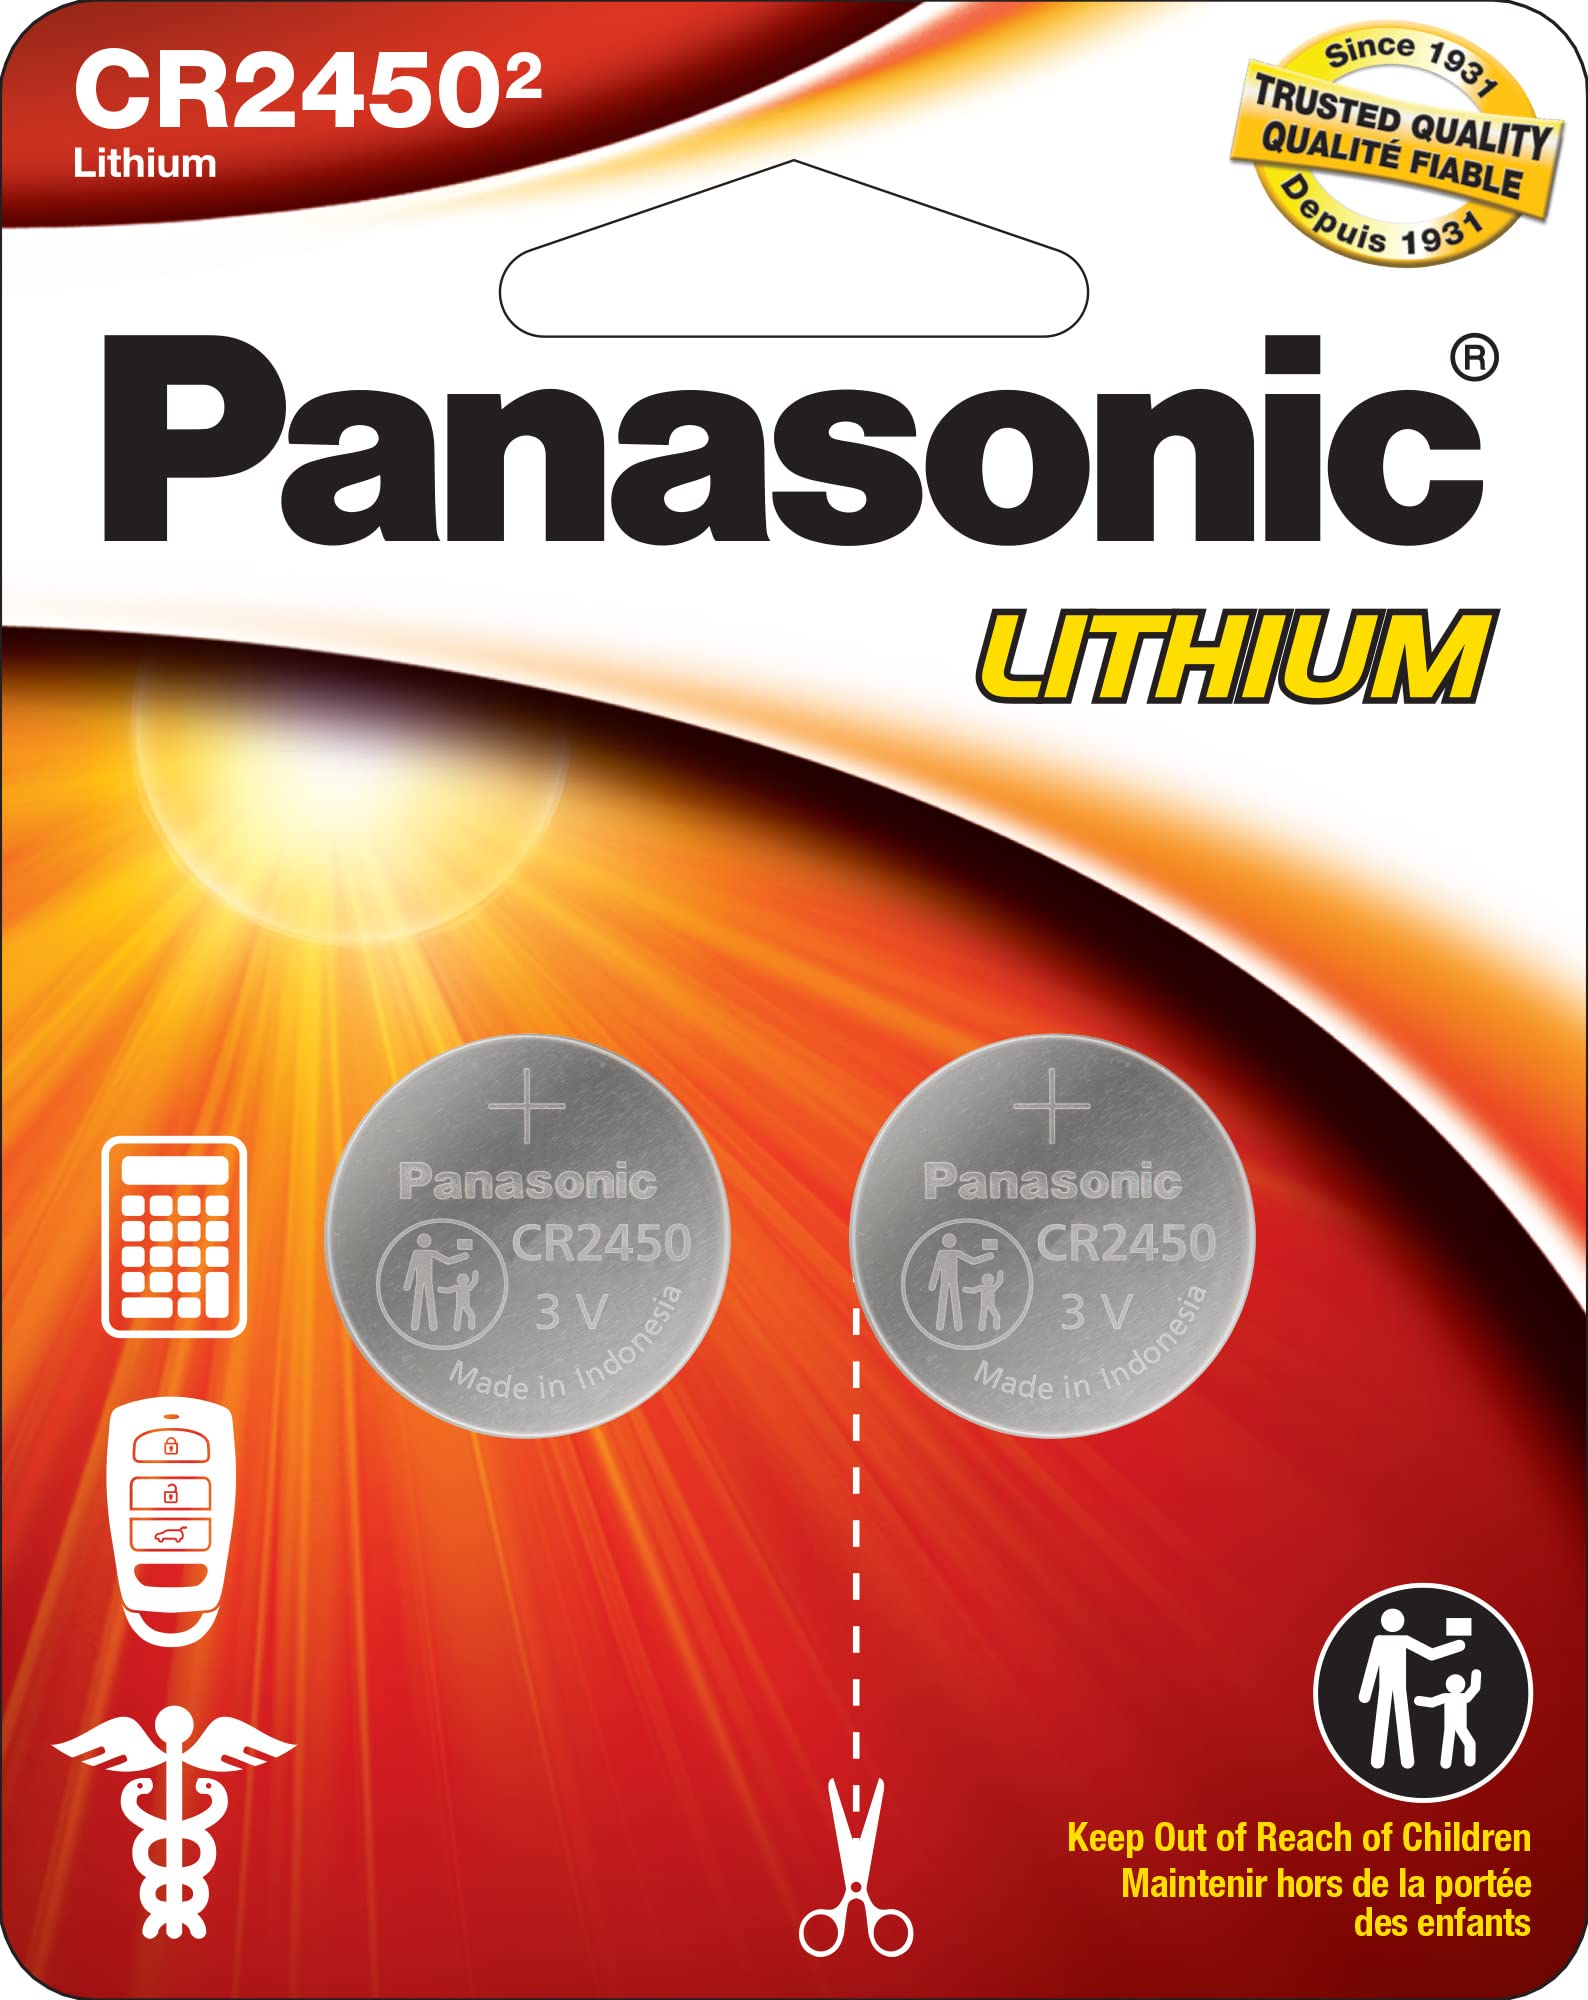 Panasonic CR2450 3.0 Volt Long Lasting Lithium Coin Cell Batteries in Child Resistant, Standards Based Packaging, 2-Battery Pack